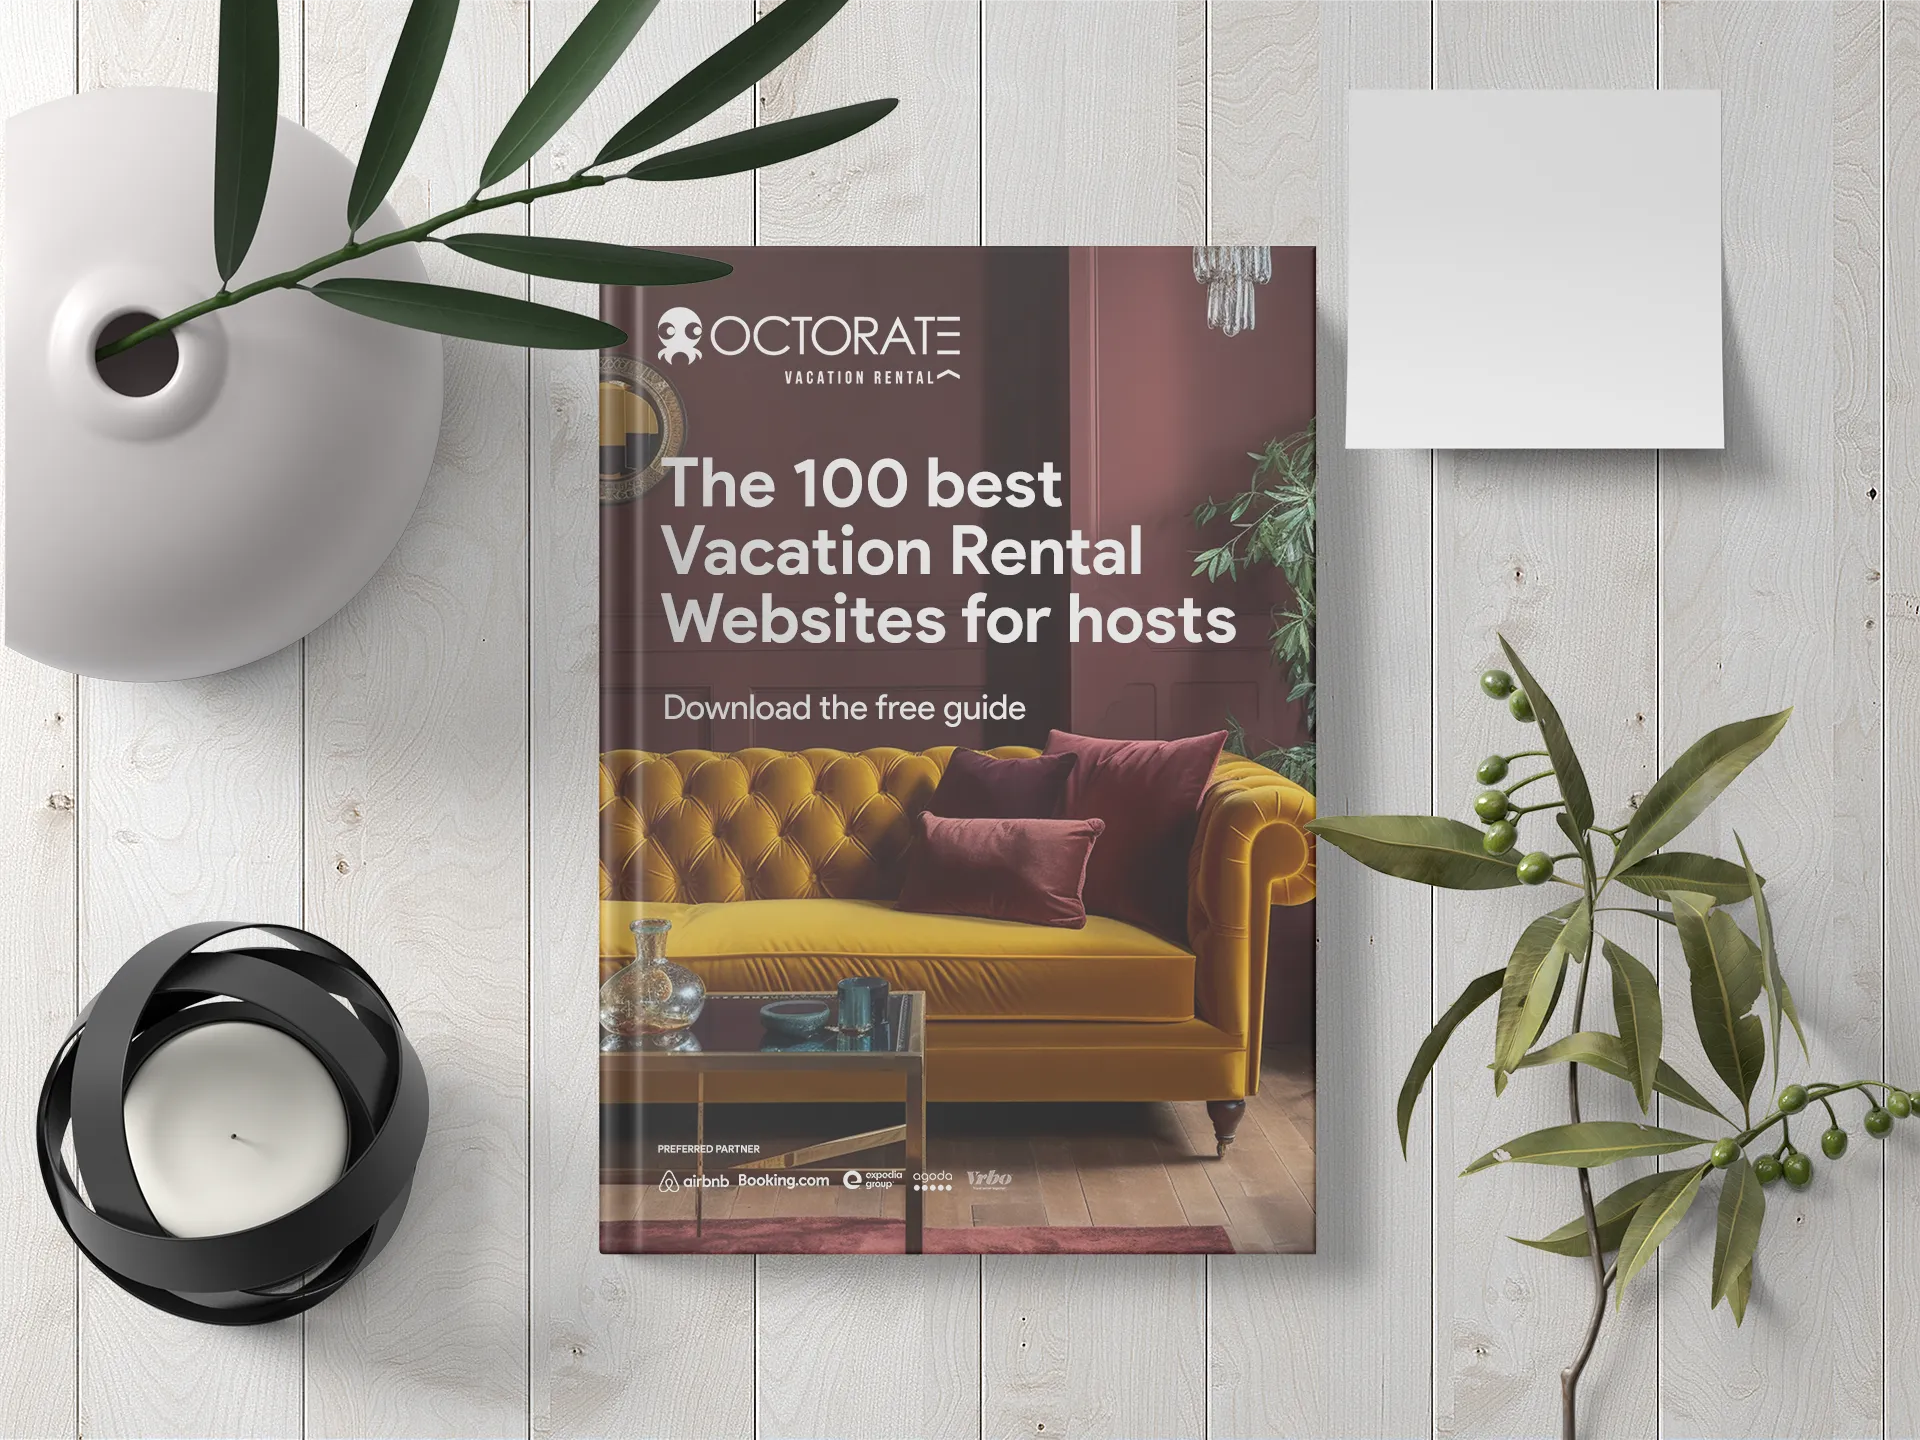 The 100 best vacation rental website for hosts